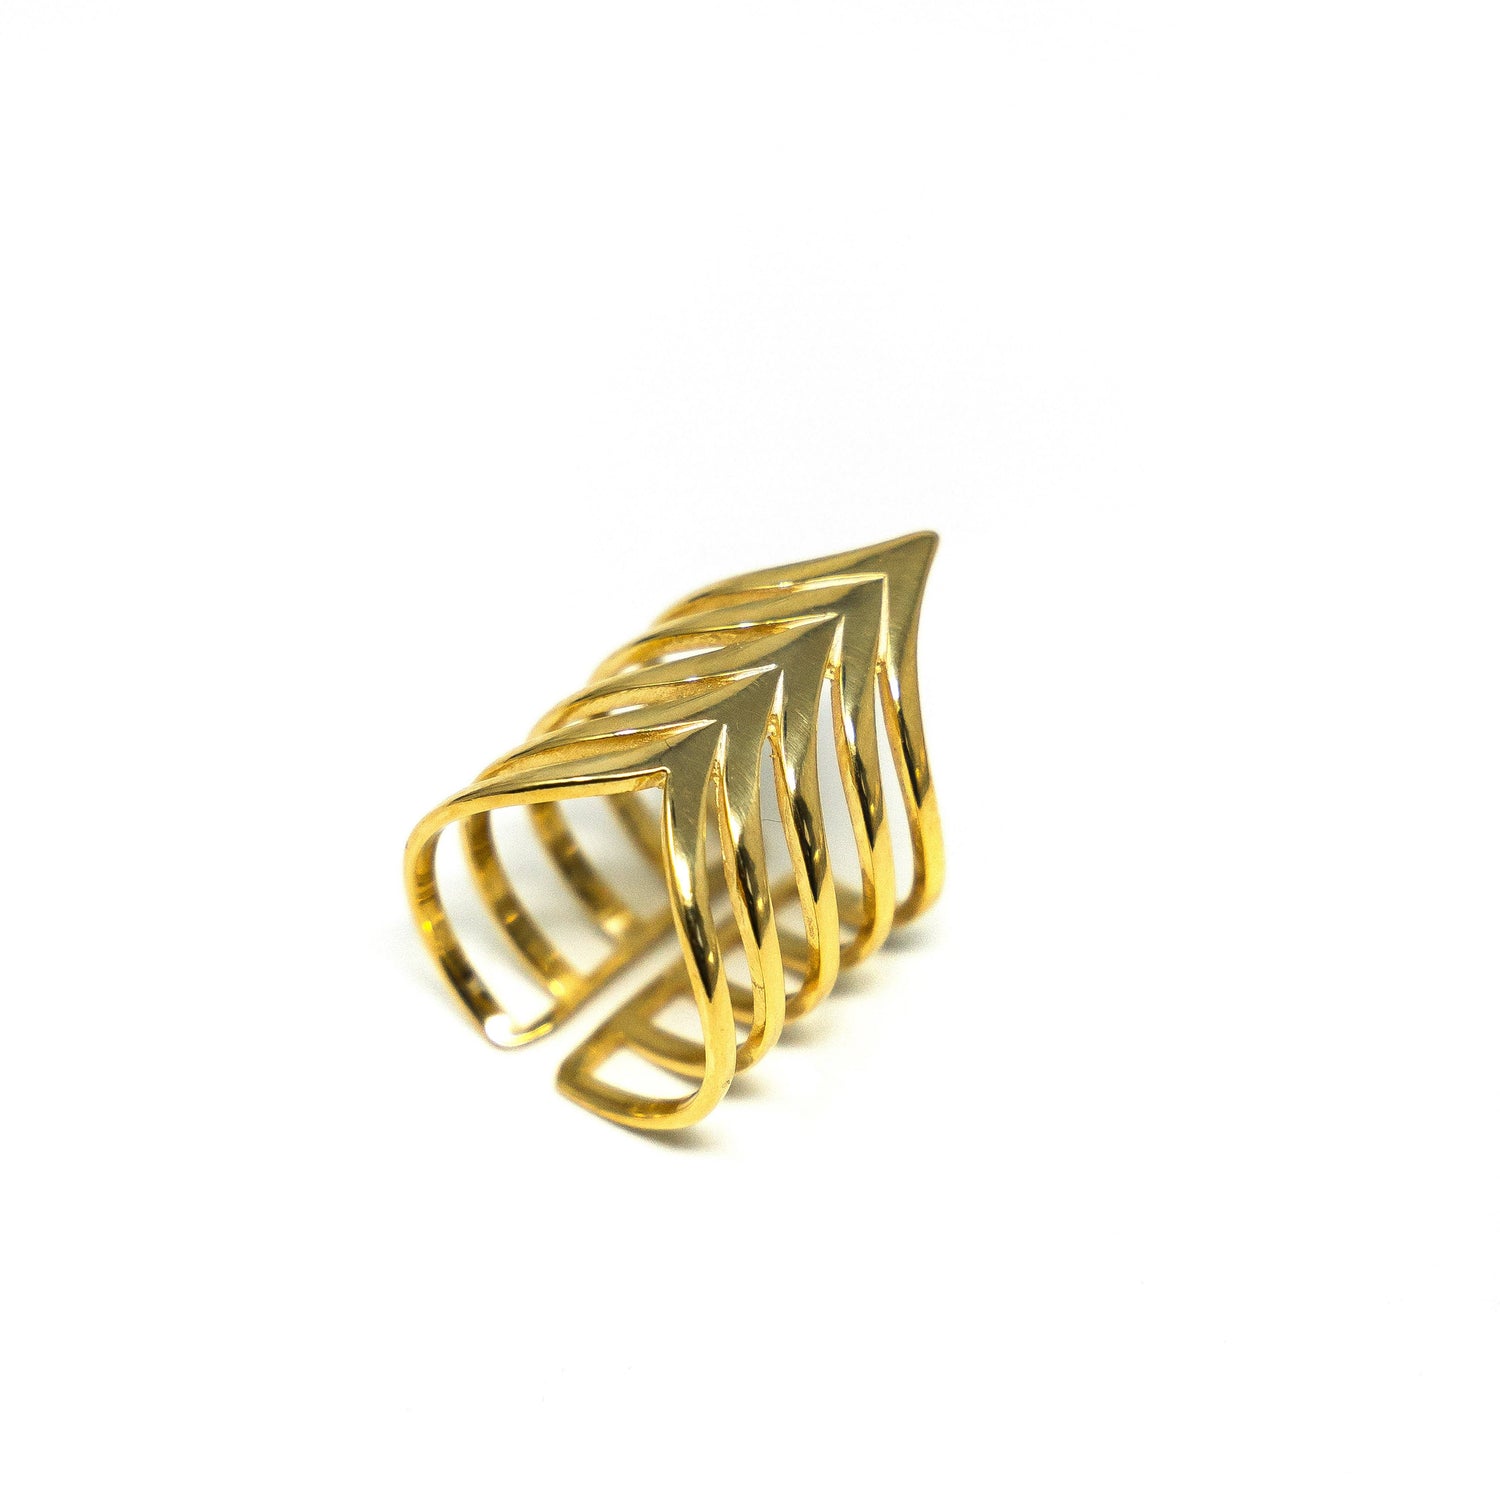 Statement Pointed Chevron Ring - Moon Room Shop and Wellness